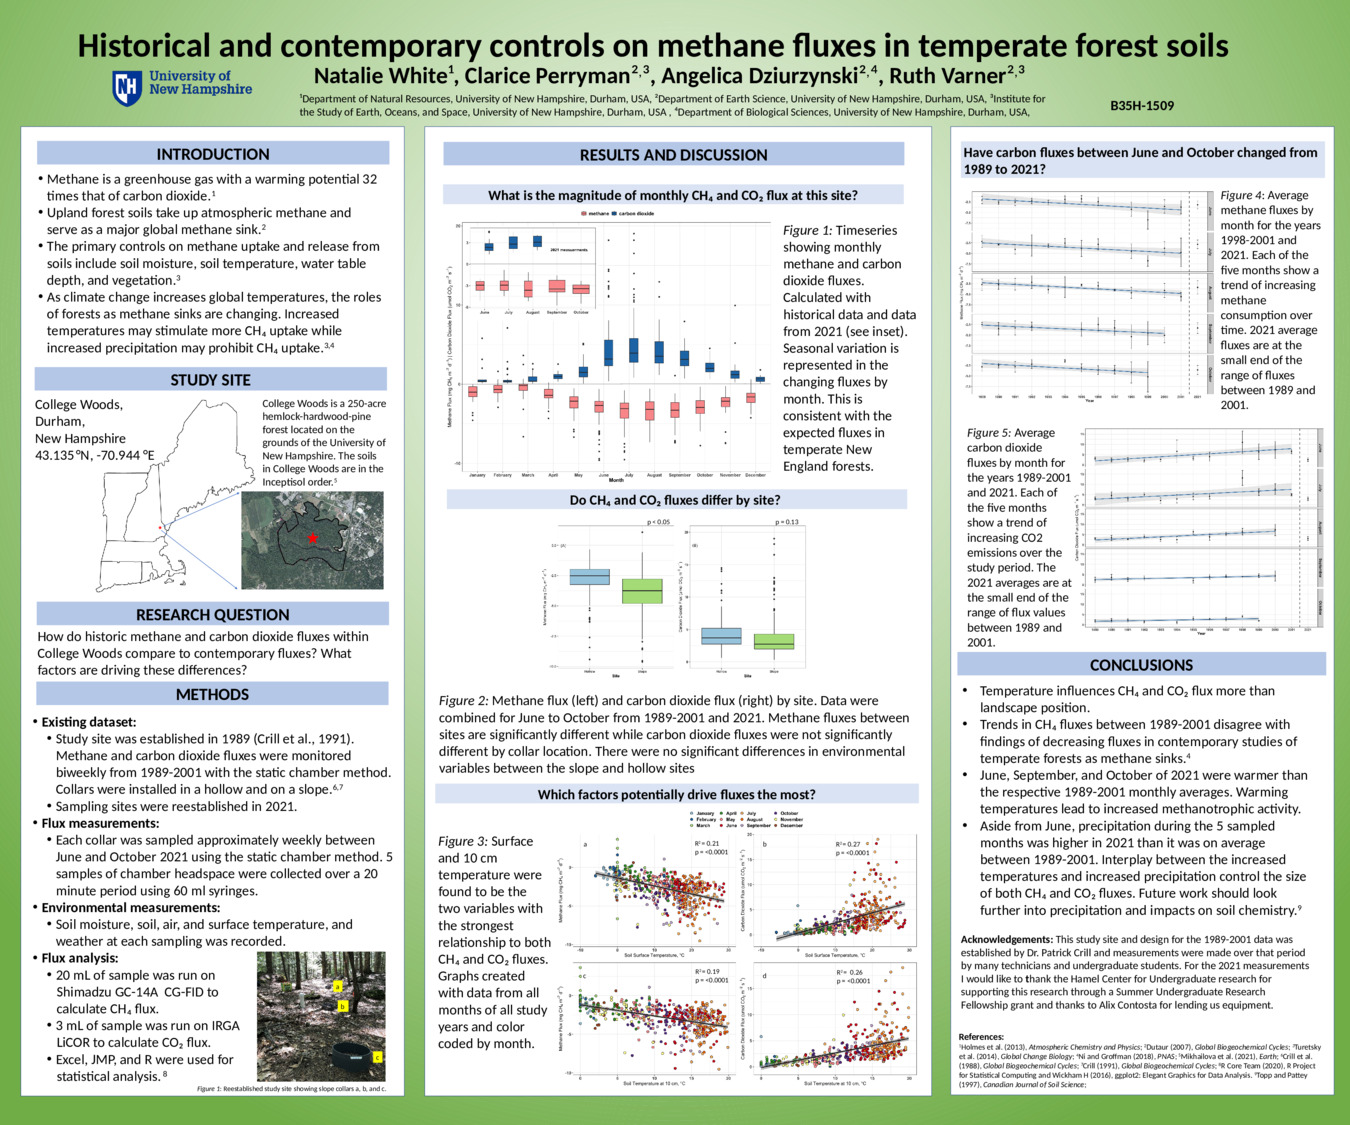 Historical And Contemporary Controls On Methane Fluxes In Temperate Forest Soils by naw1014